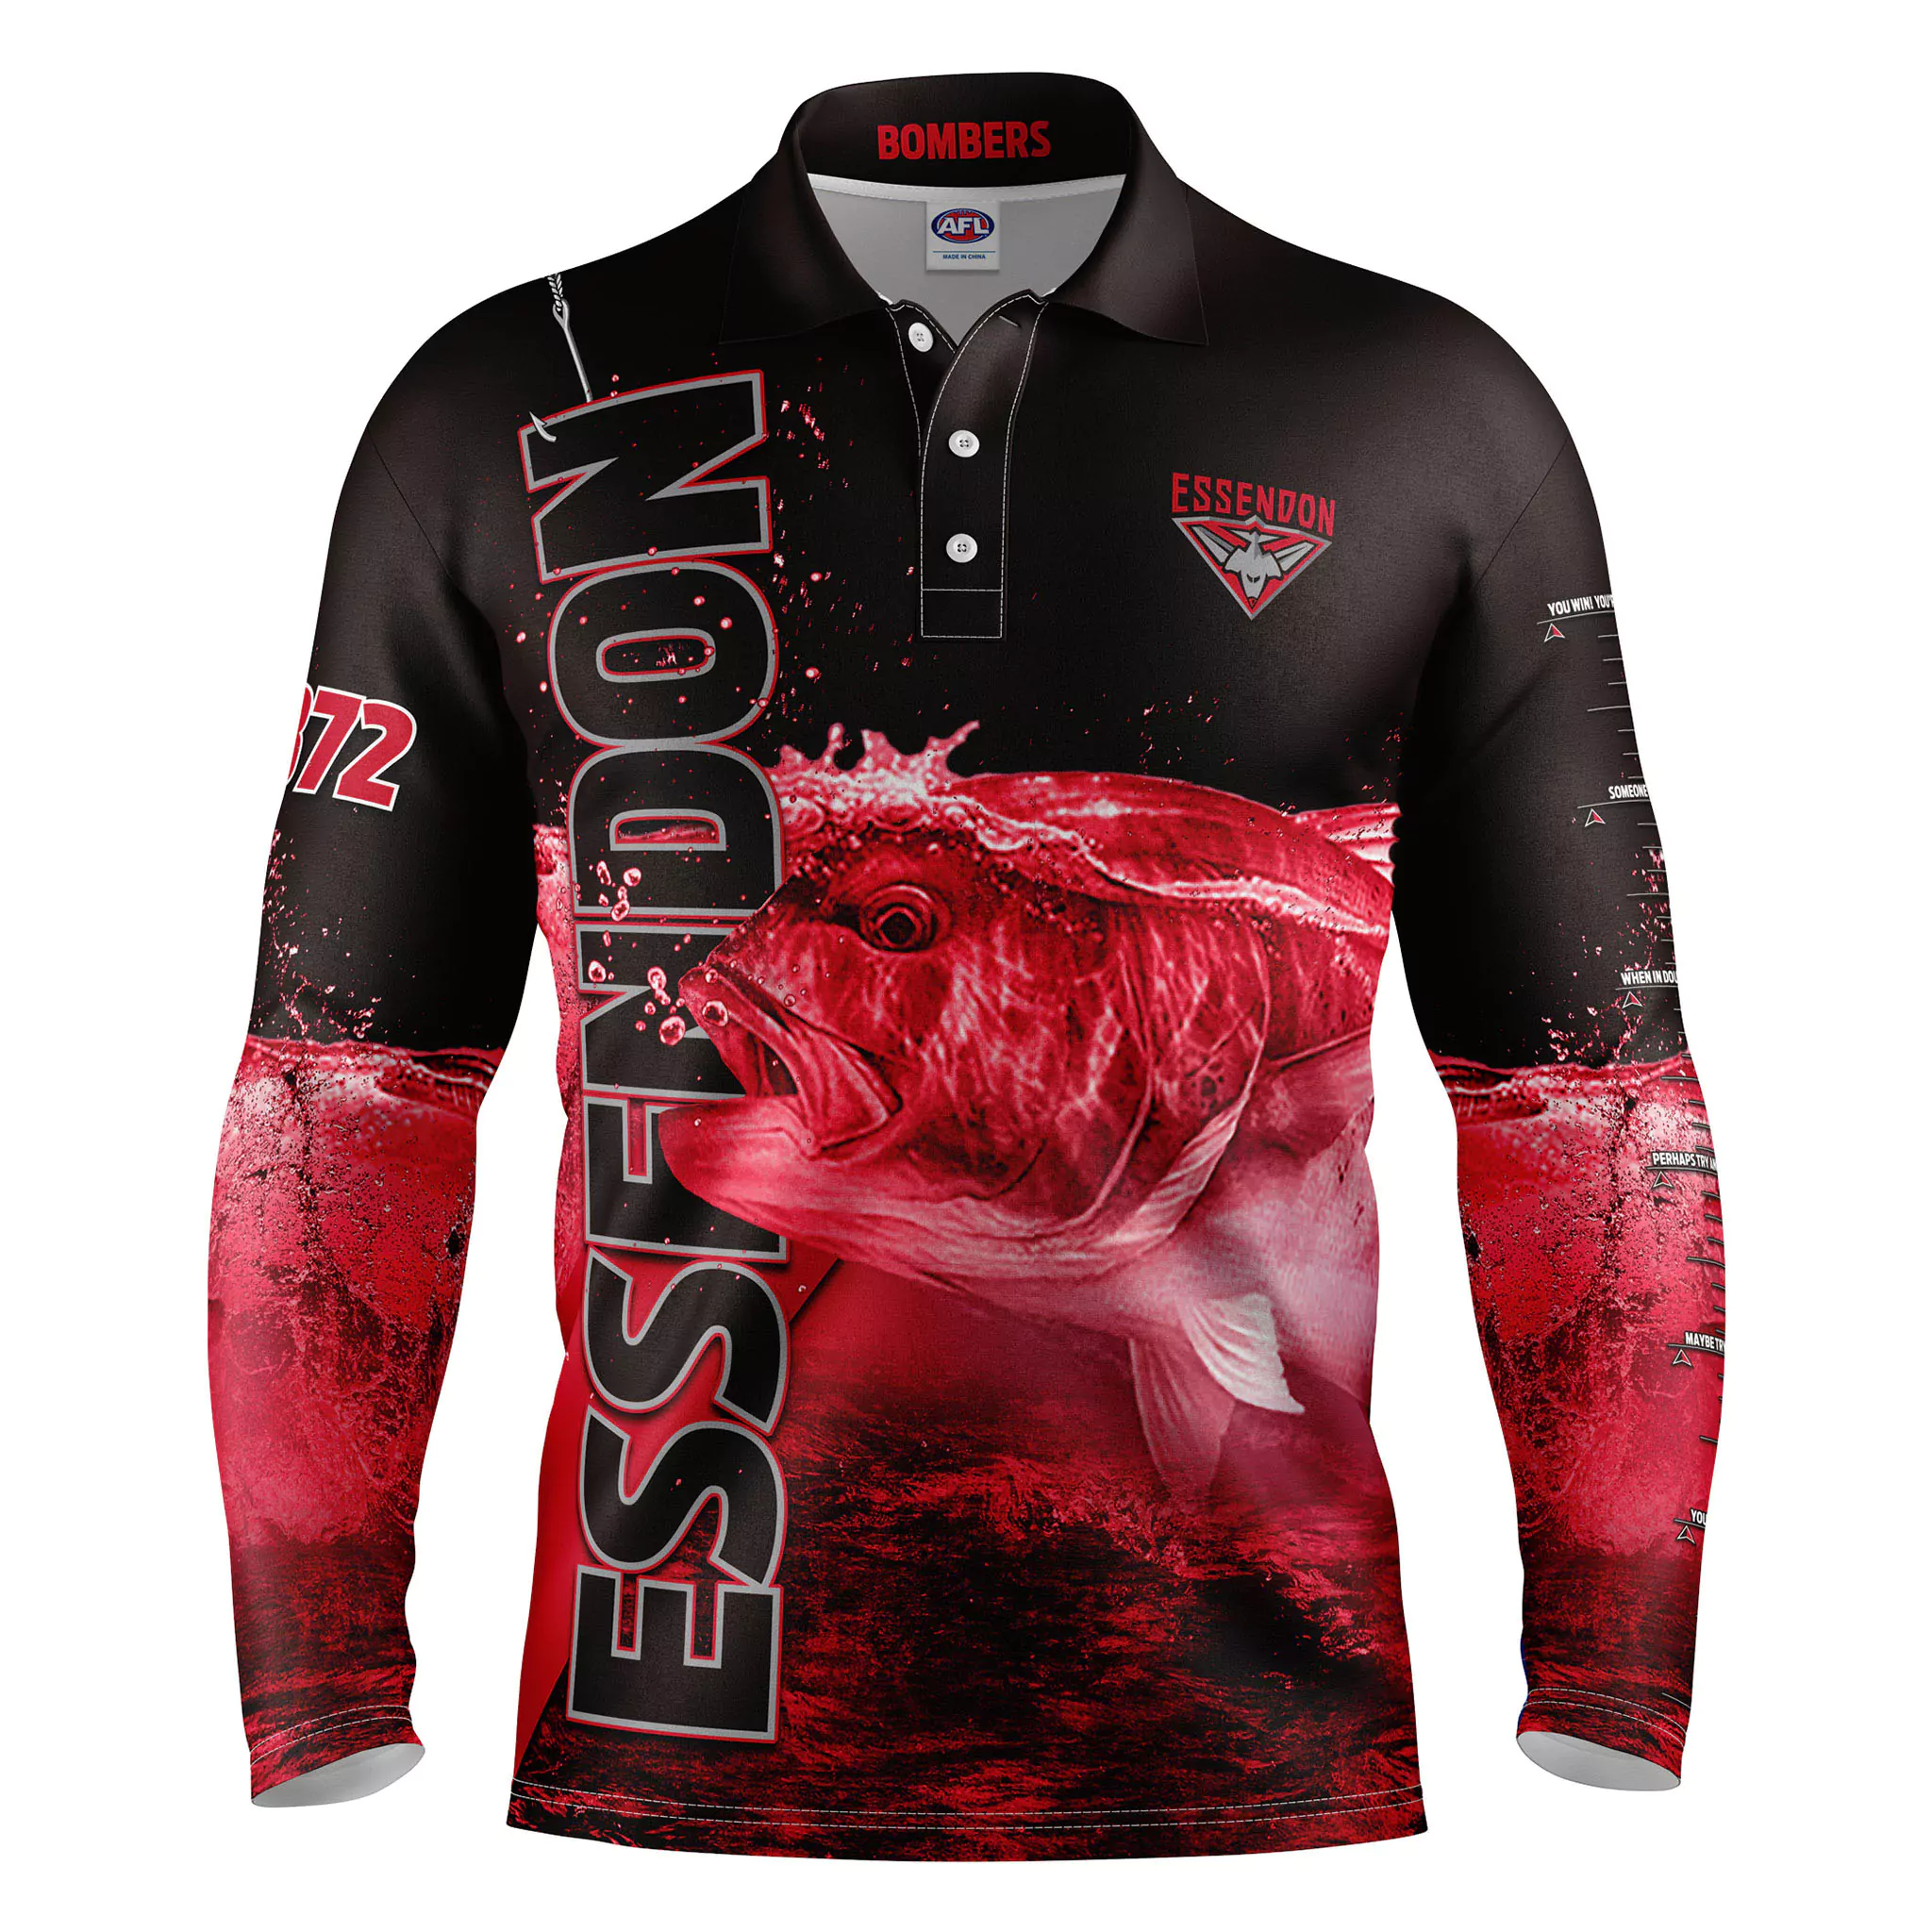 Buy 2019 Essendon Bombers Fishing Shirt - Youth - Your Jersey